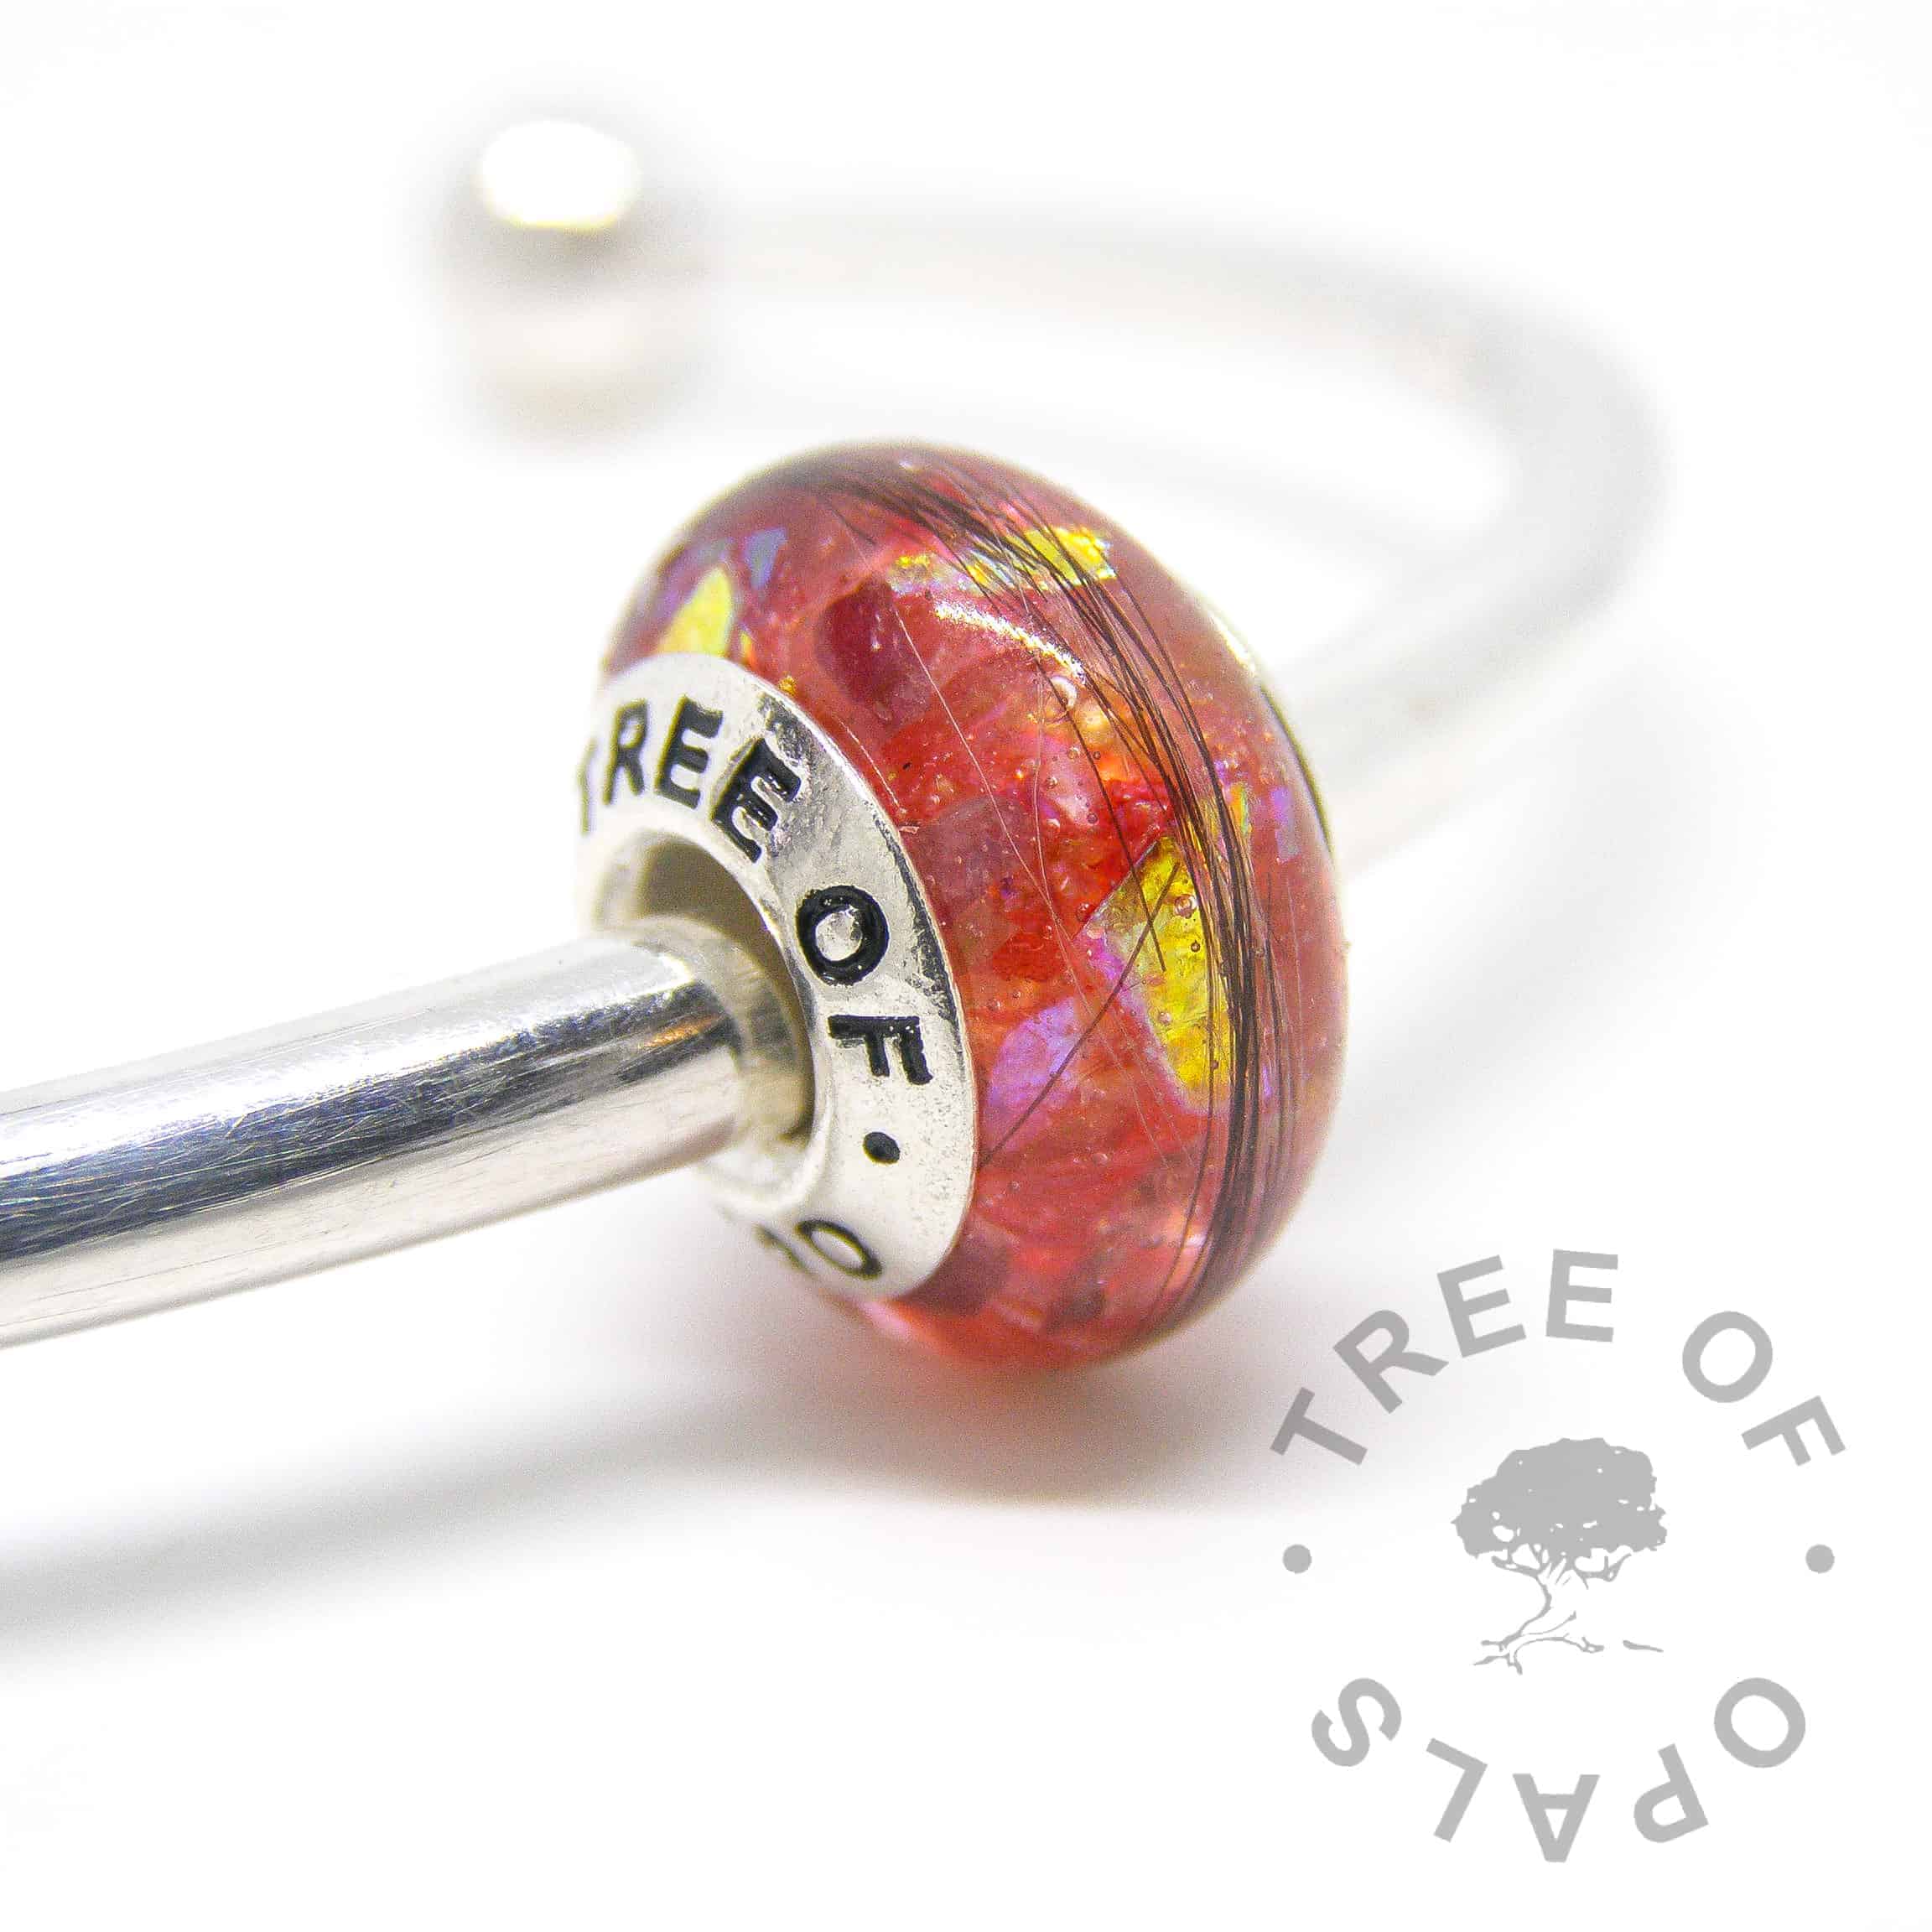 lock of hair charm bead in resin, ruby July birthstone, red opalescent flakes and genuine gold leaf guilded centre with a solid sterling silver Tree of Opals branded core